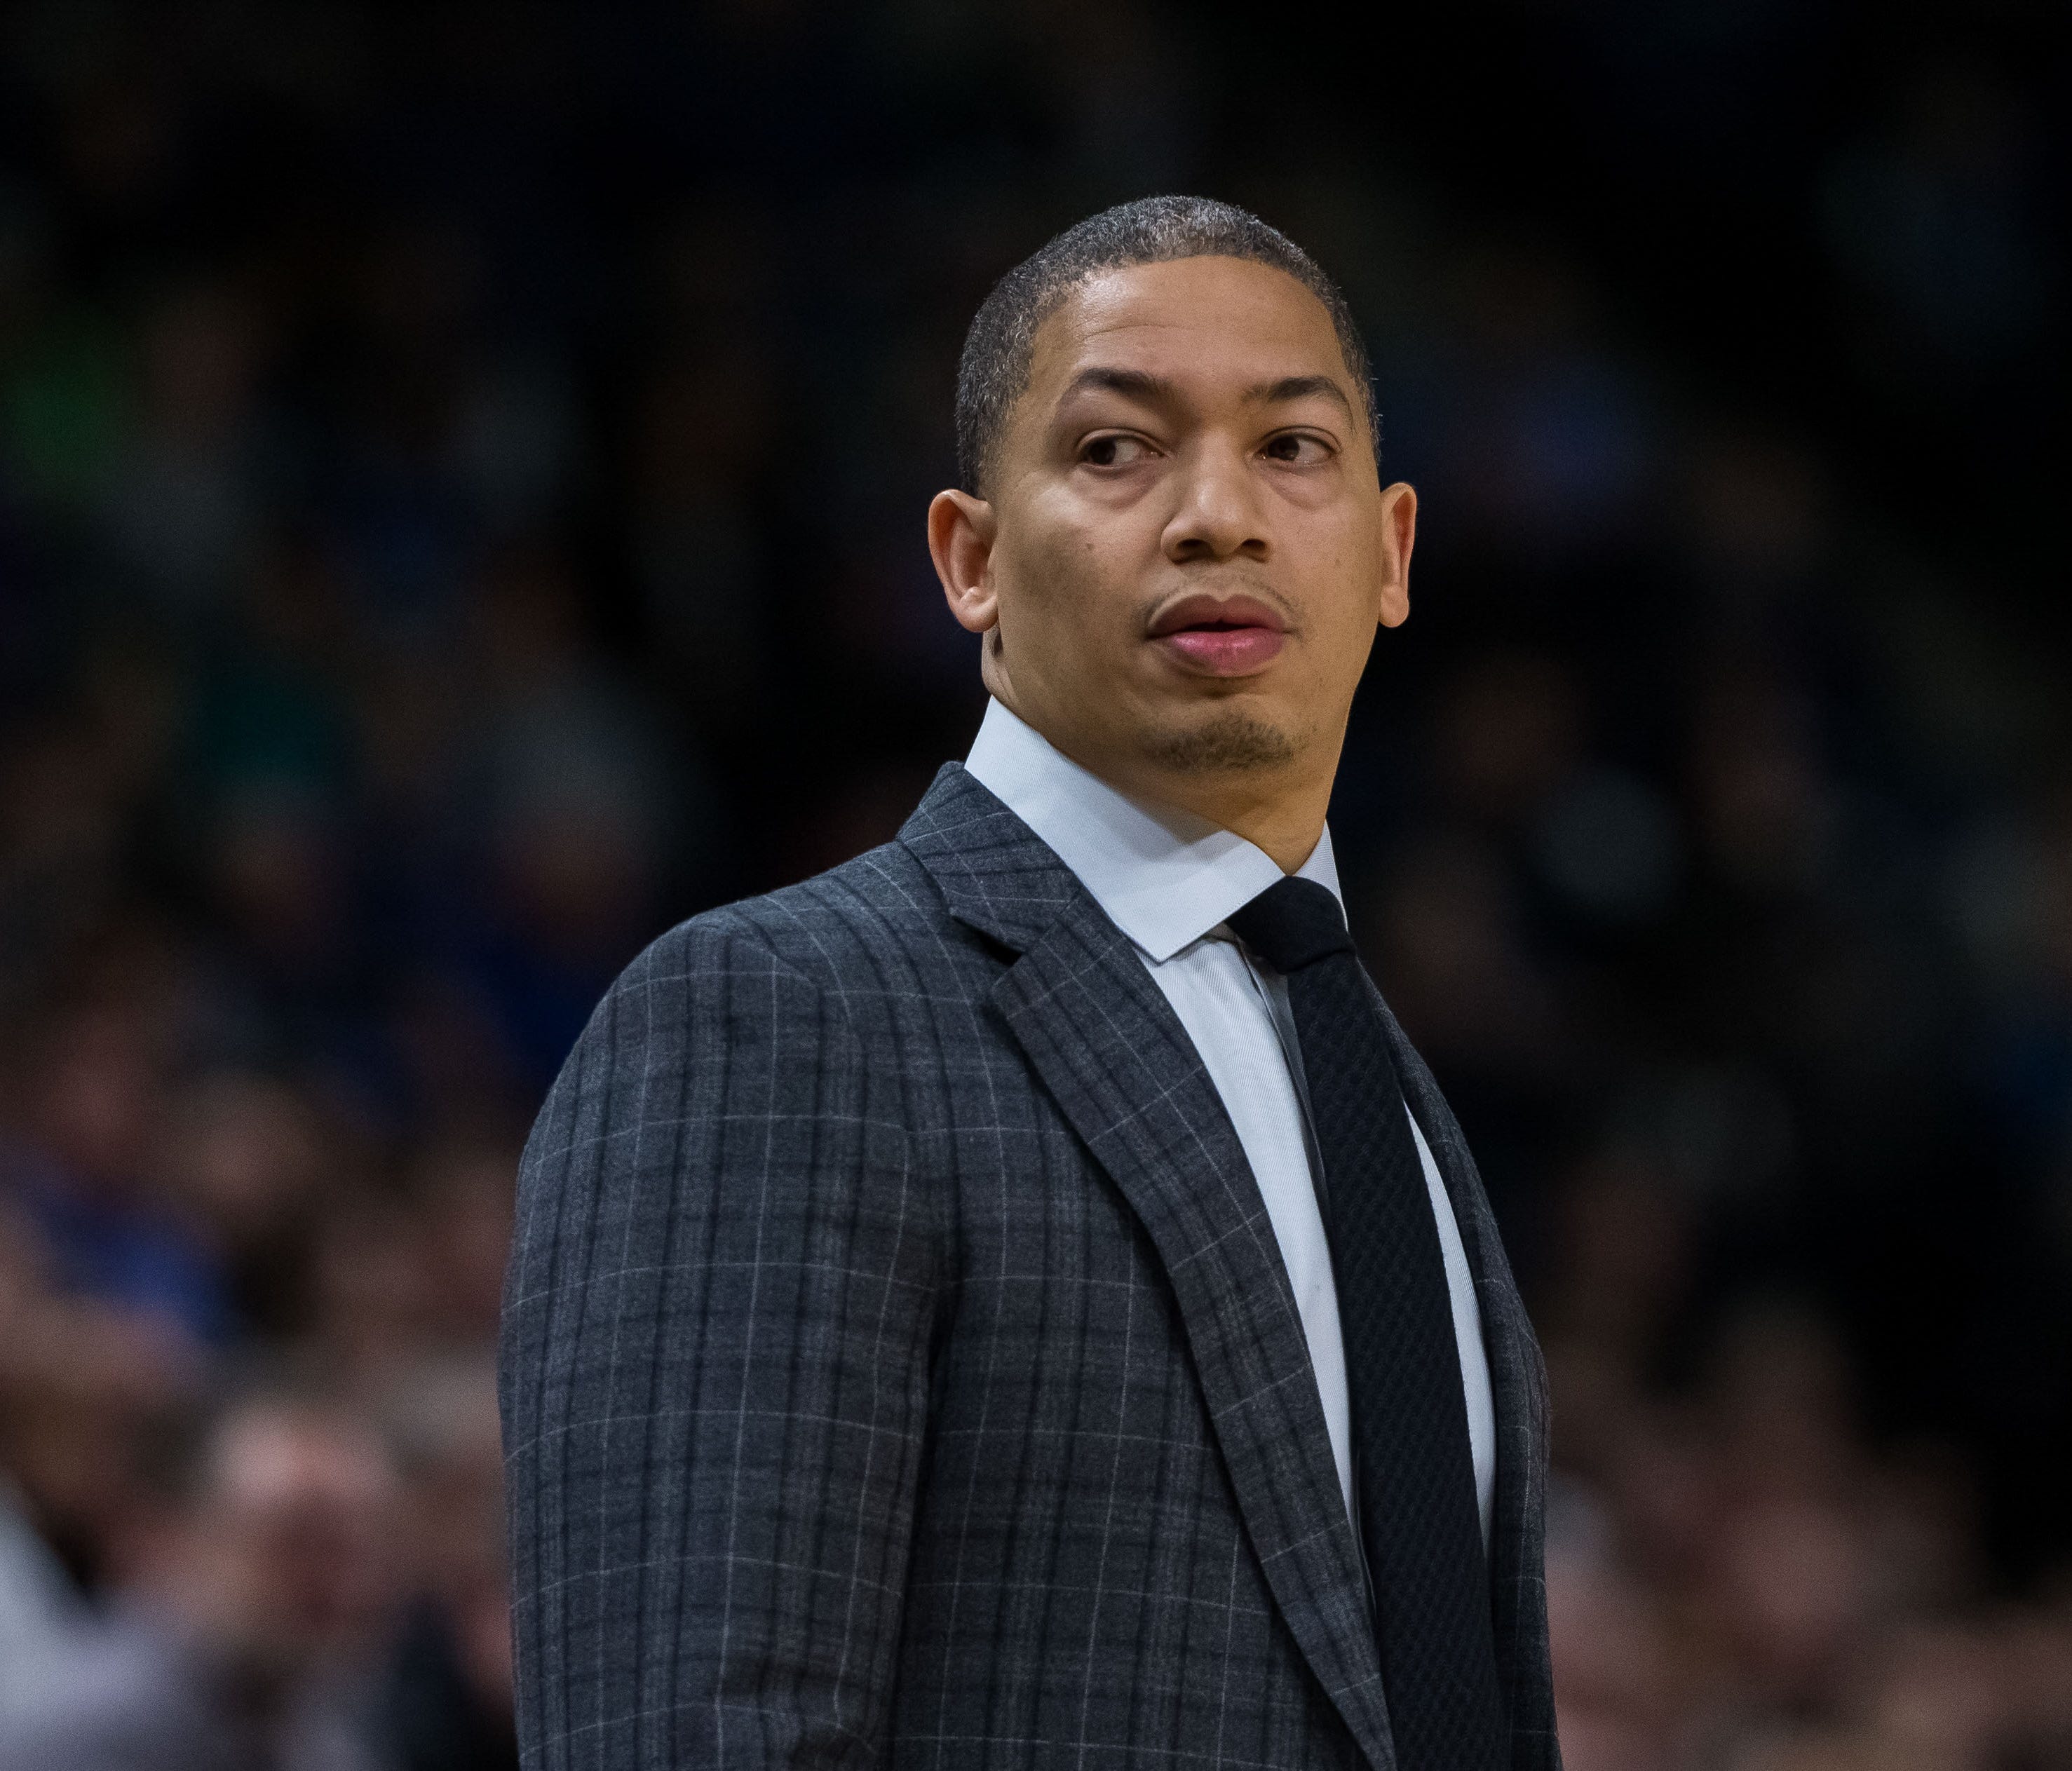 Cleveland Cavaliers head coach Tyronn Lue in the second quarter against the Minnesota Timberwolves at Target Center.